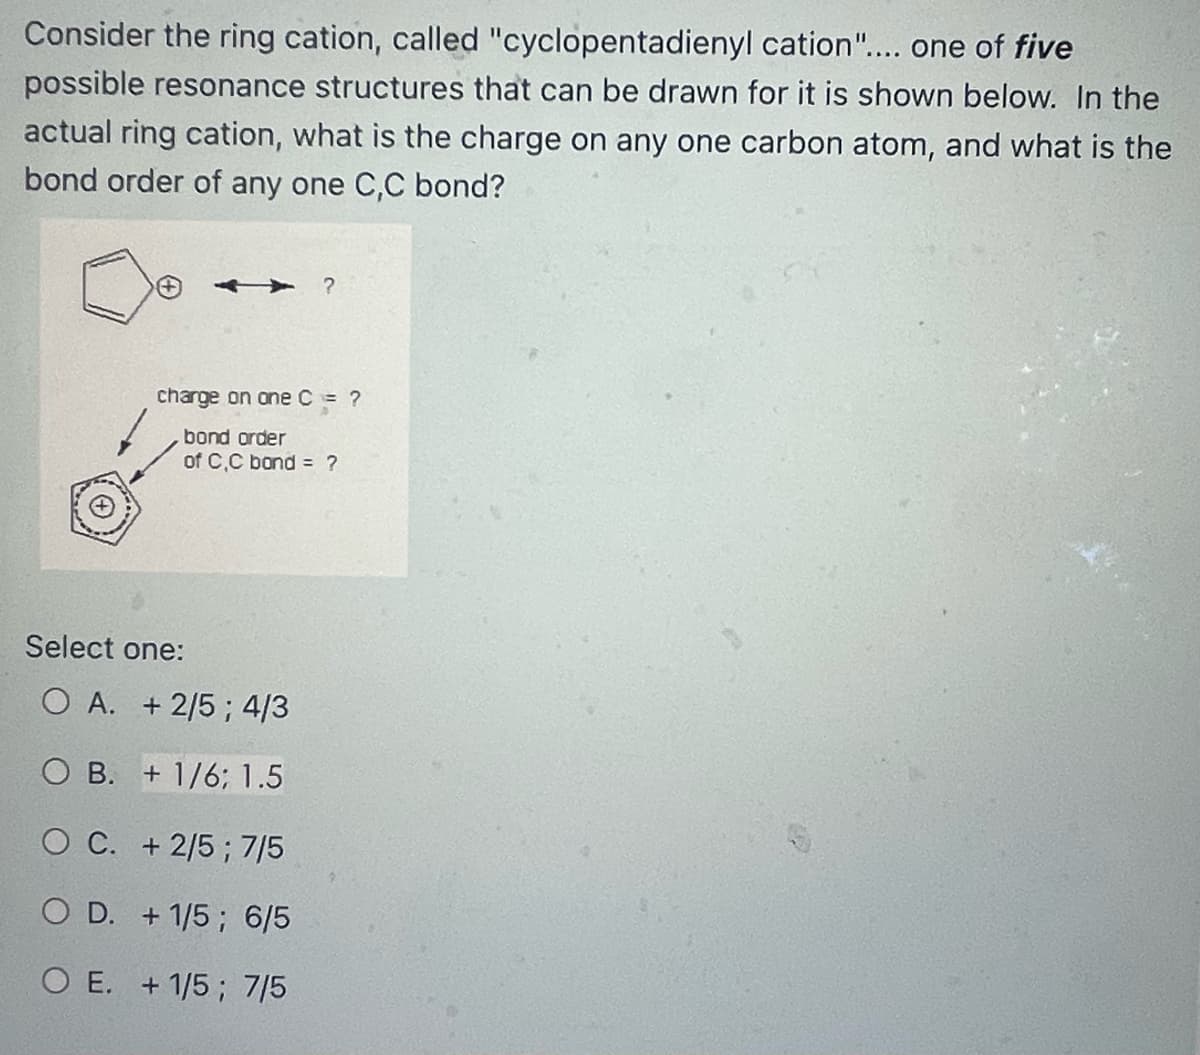 Consider the ring cation, called "cyclopentadienyl cation".... one of five
possible resonance structures that can be drawn for it is shown below. In the
actual ring cation, what is the charge on any one carbon atom, and what is the
bond order of any one C,C bond?
?
charge on one C = ?
bond order
of C,C bond =
Select one:
O A. +2/5; 4/3
OB. + 1/6; 1.5
O C. + 2/5; 7/5
O D. + 1/5; 6/5
O E. + 1/5; 7/5